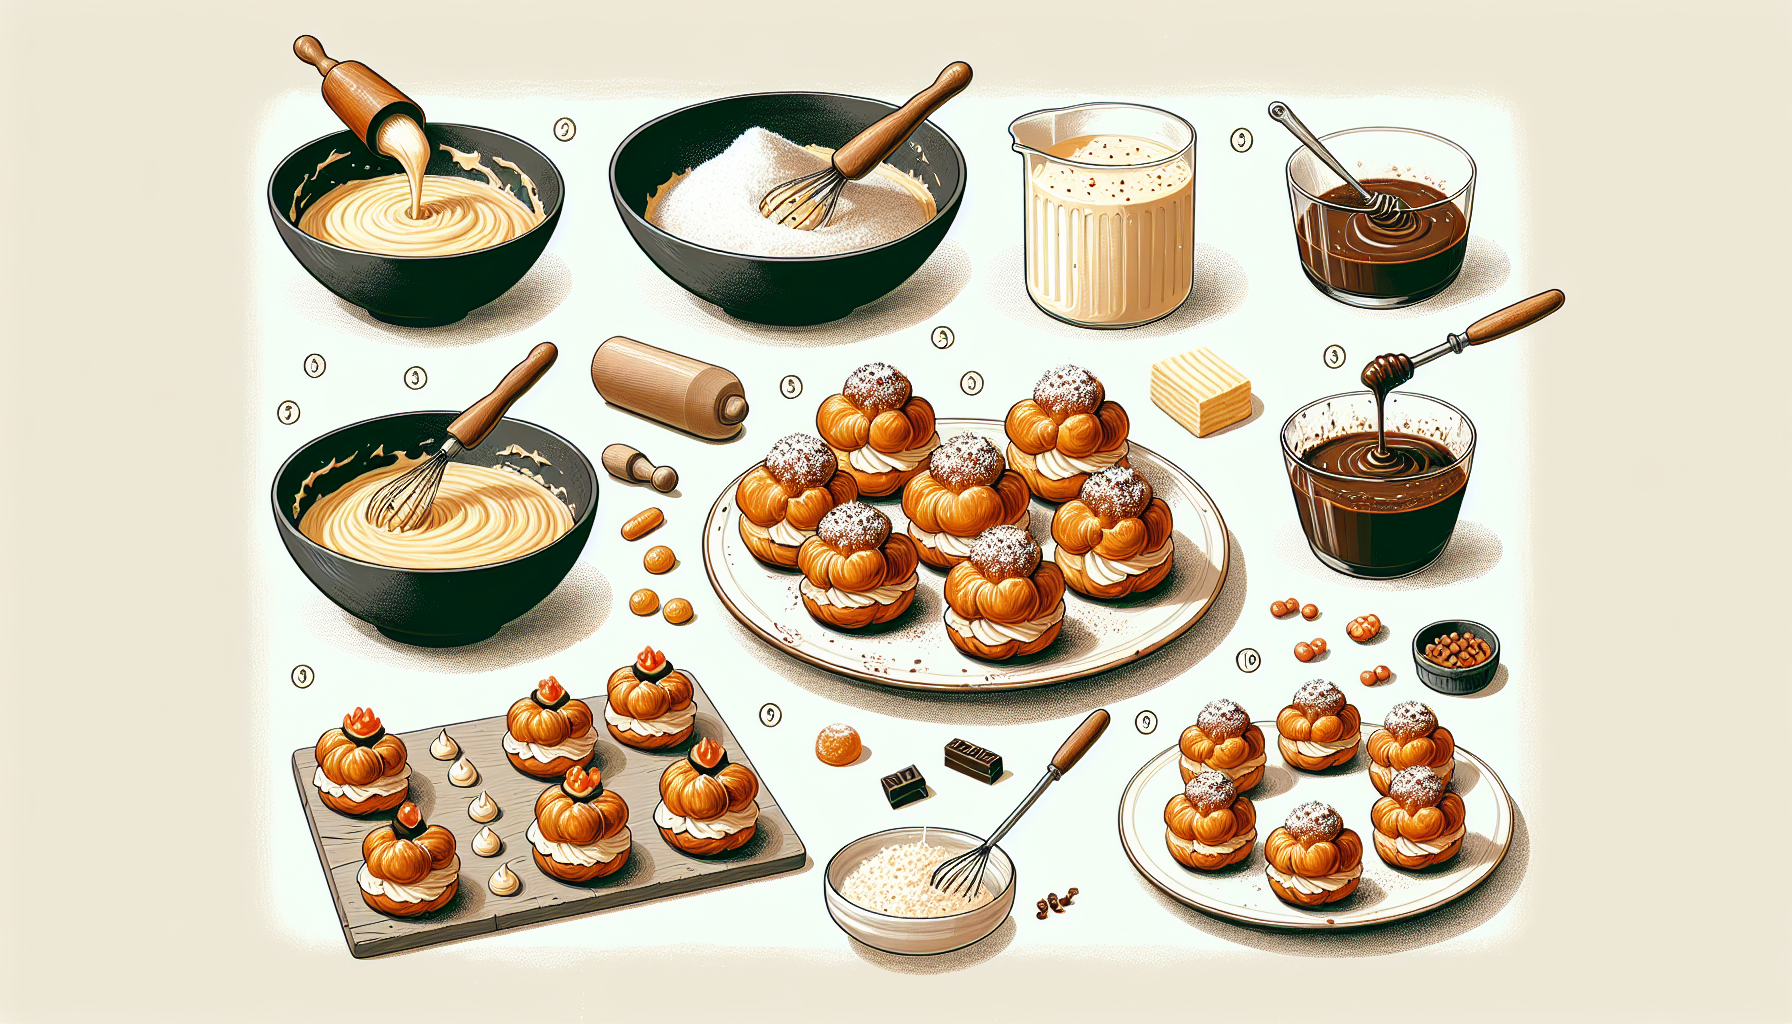 How Do You Prepare Profiteroles At Home, And What Creative Fillings Do You Recommend?